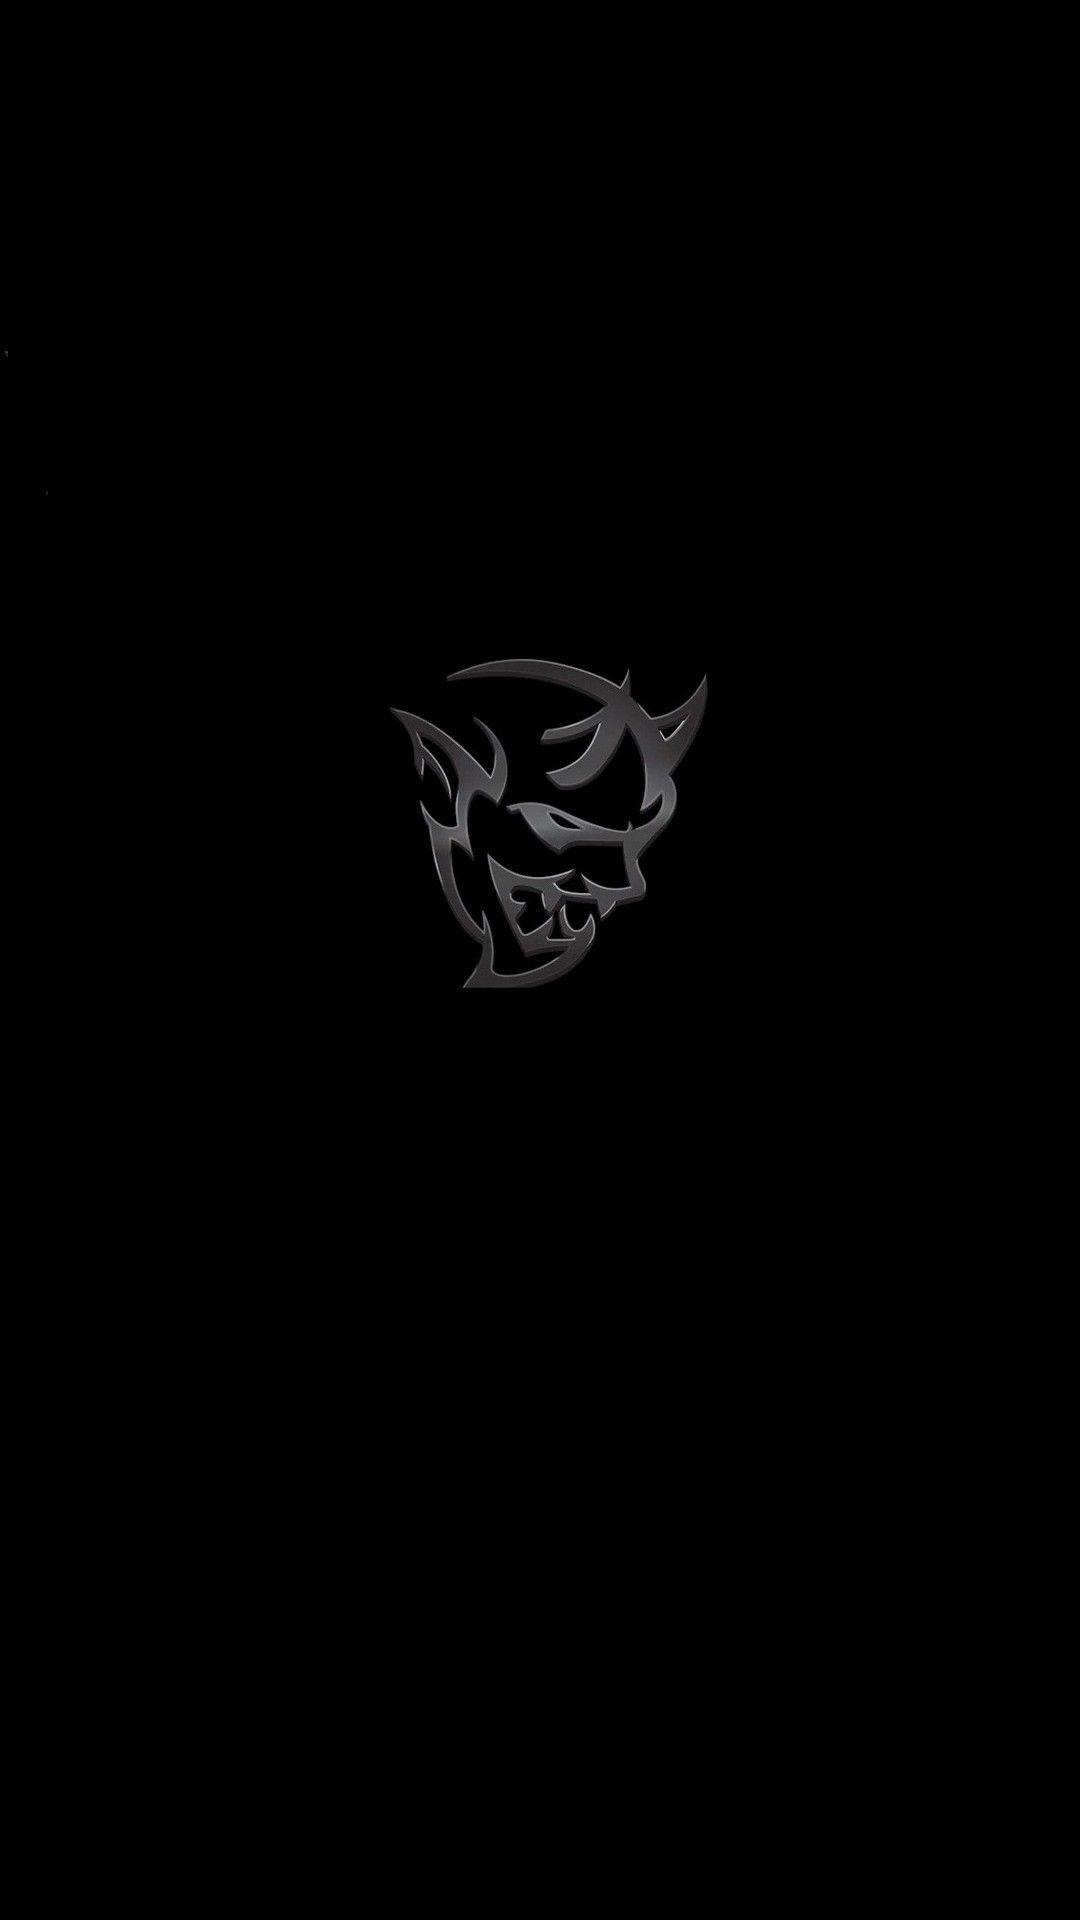 Black and White Dodge Hellcat Logo - Android Wallpaper Dodge Demon Logo - 2019 | y | Dodge, Wallpaper ...